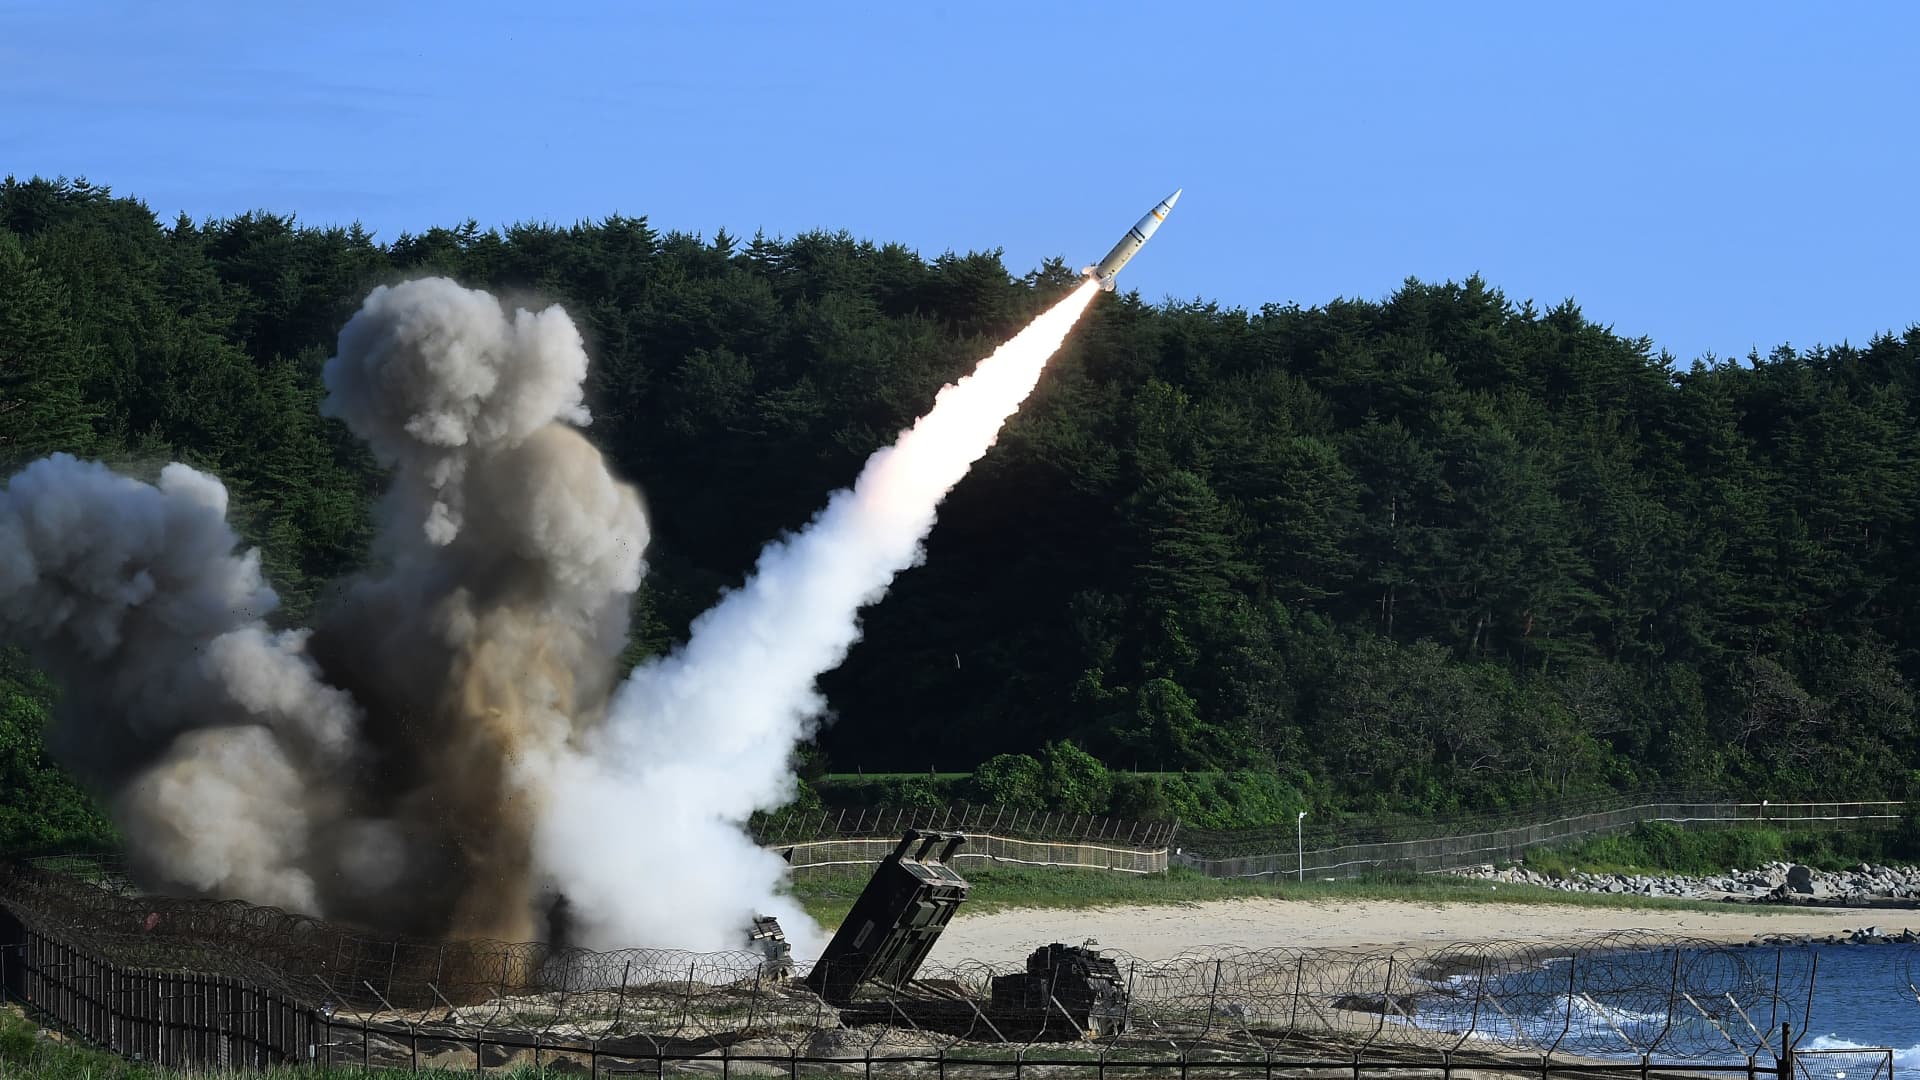 In this handout photo released by the South Korean Defense Ministry, U.S. M270 Multiple Launch Rocket System firing an MGM-140 Army Tactical Missile during a U.S. and South Korea joint missile drill aimed to counter North Korea's intercontinental ballistic missile test on July 5, 2017 in East Coast, South Korea.